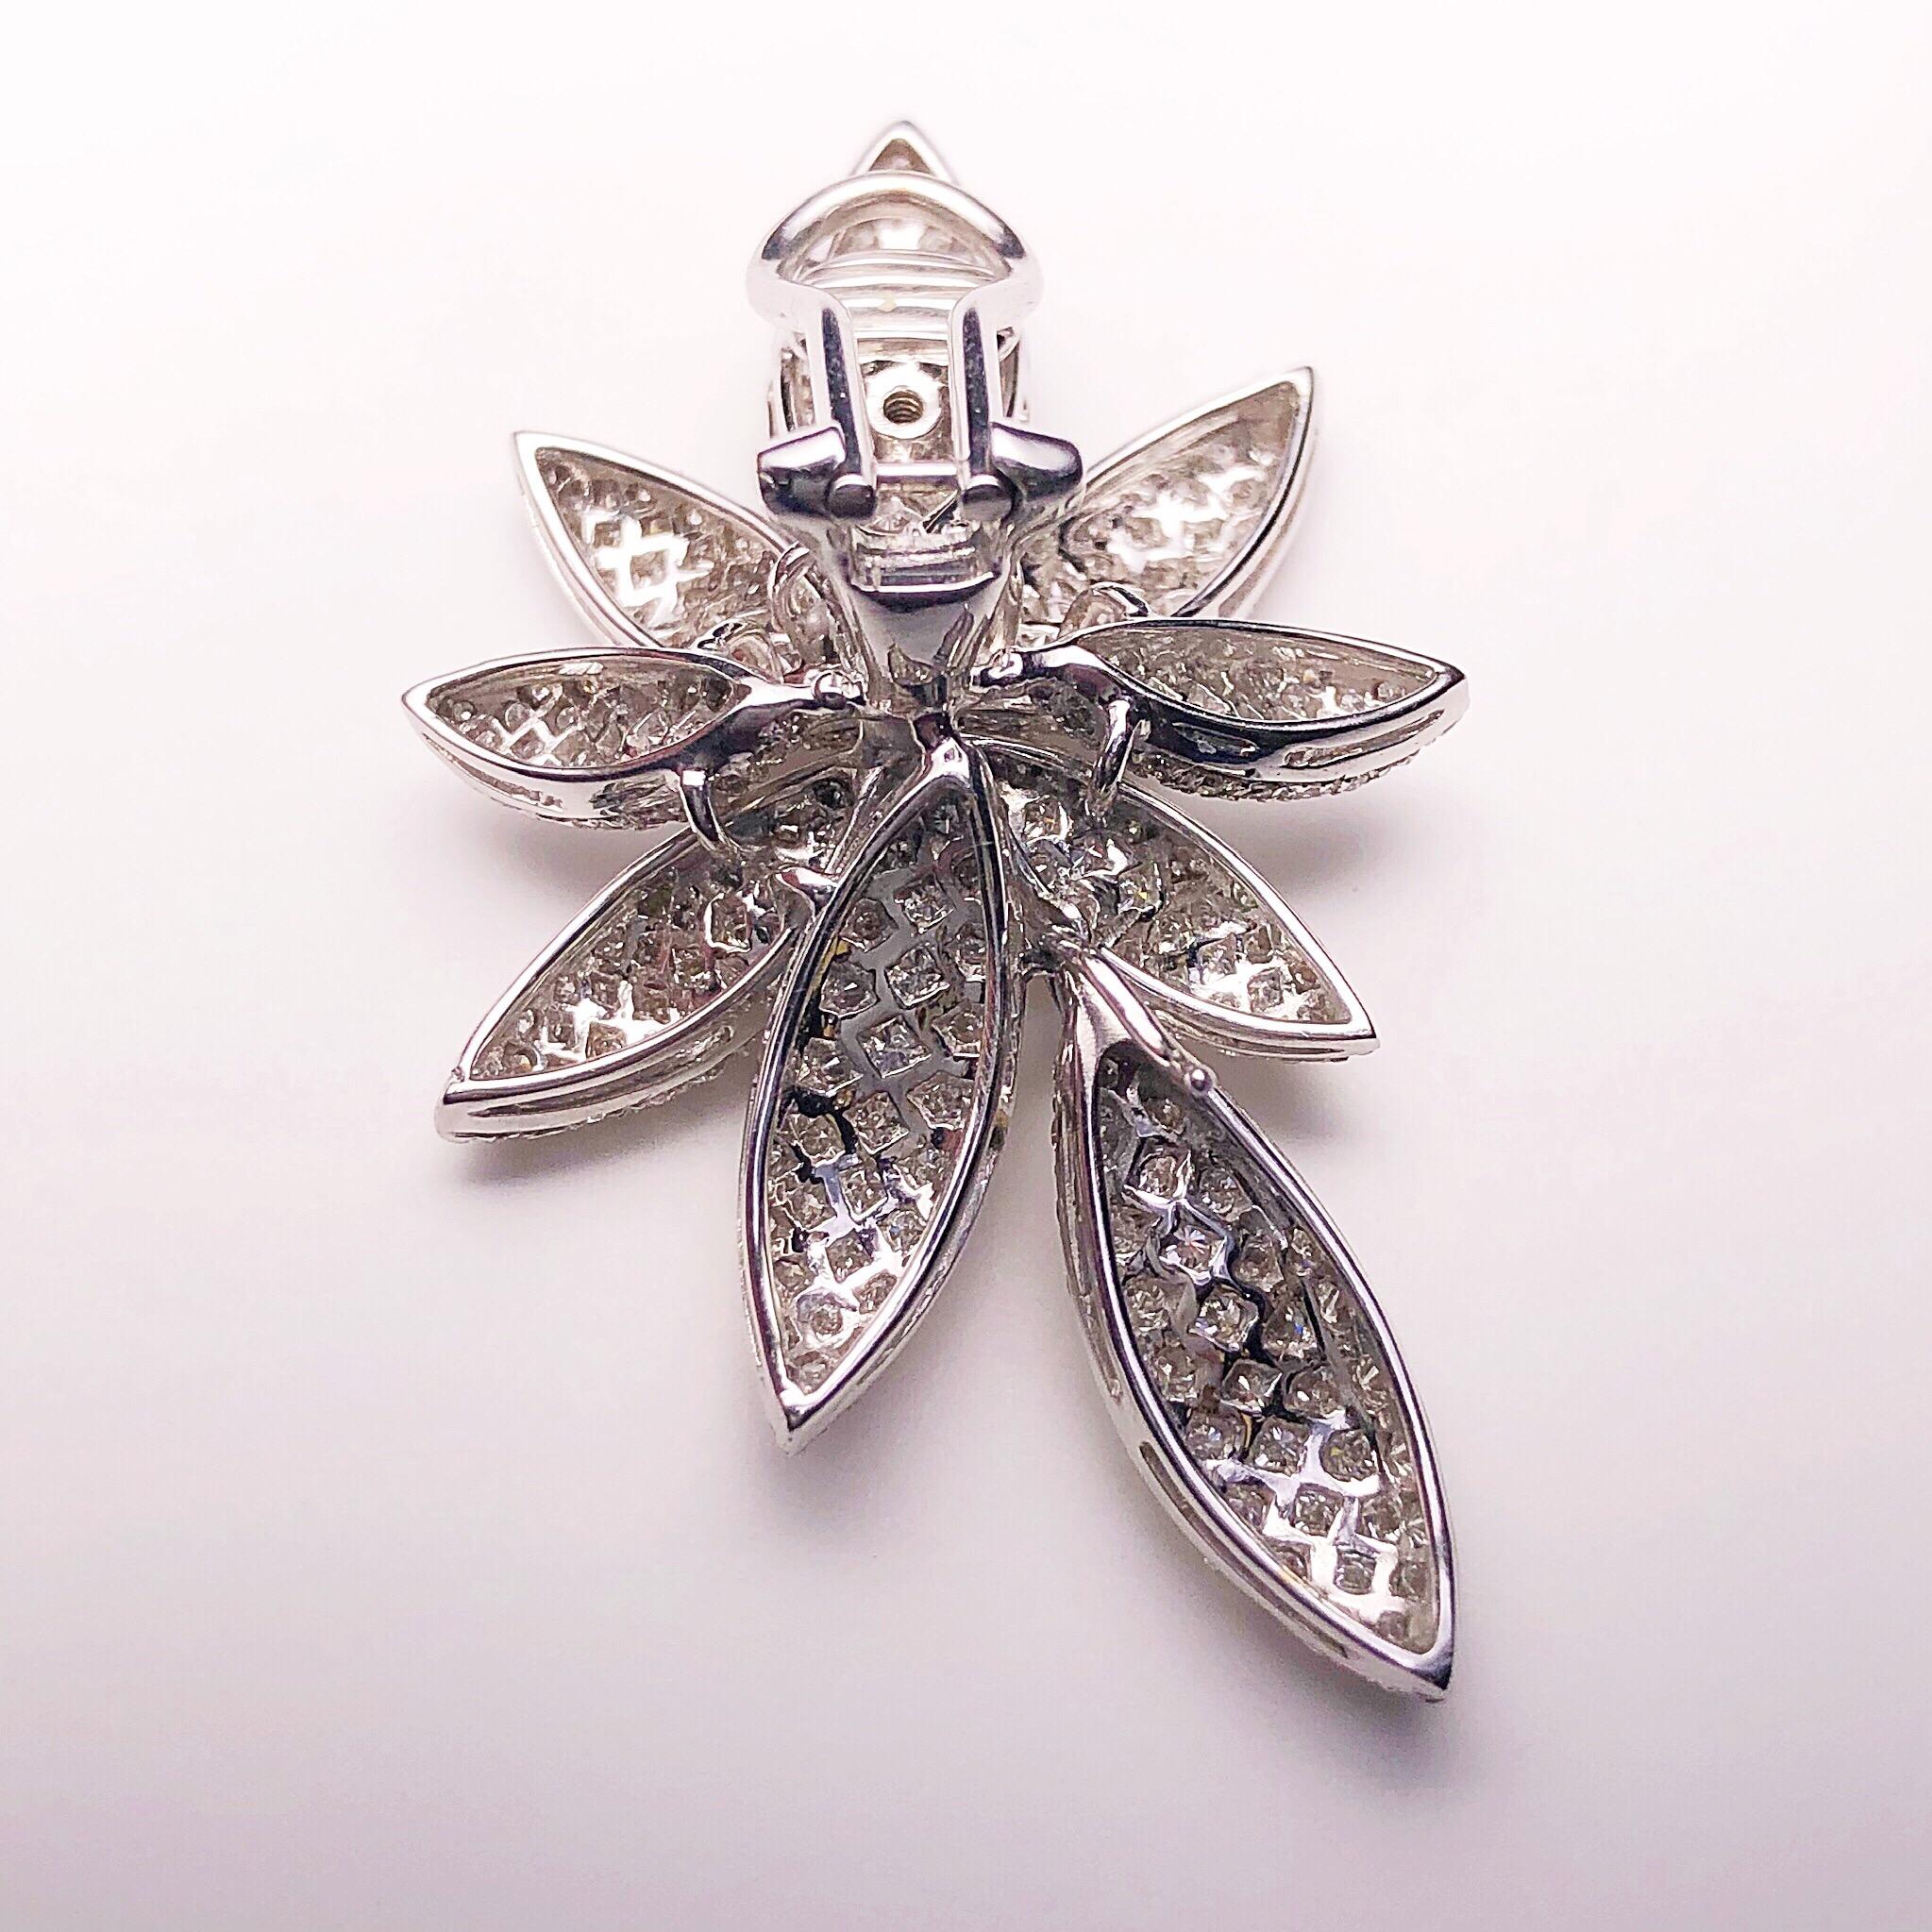 Bernard Grosz 18 Karat White Gold and 6.81 Carat Diamond Flower Earclips In New Condition For Sale In New York, NY